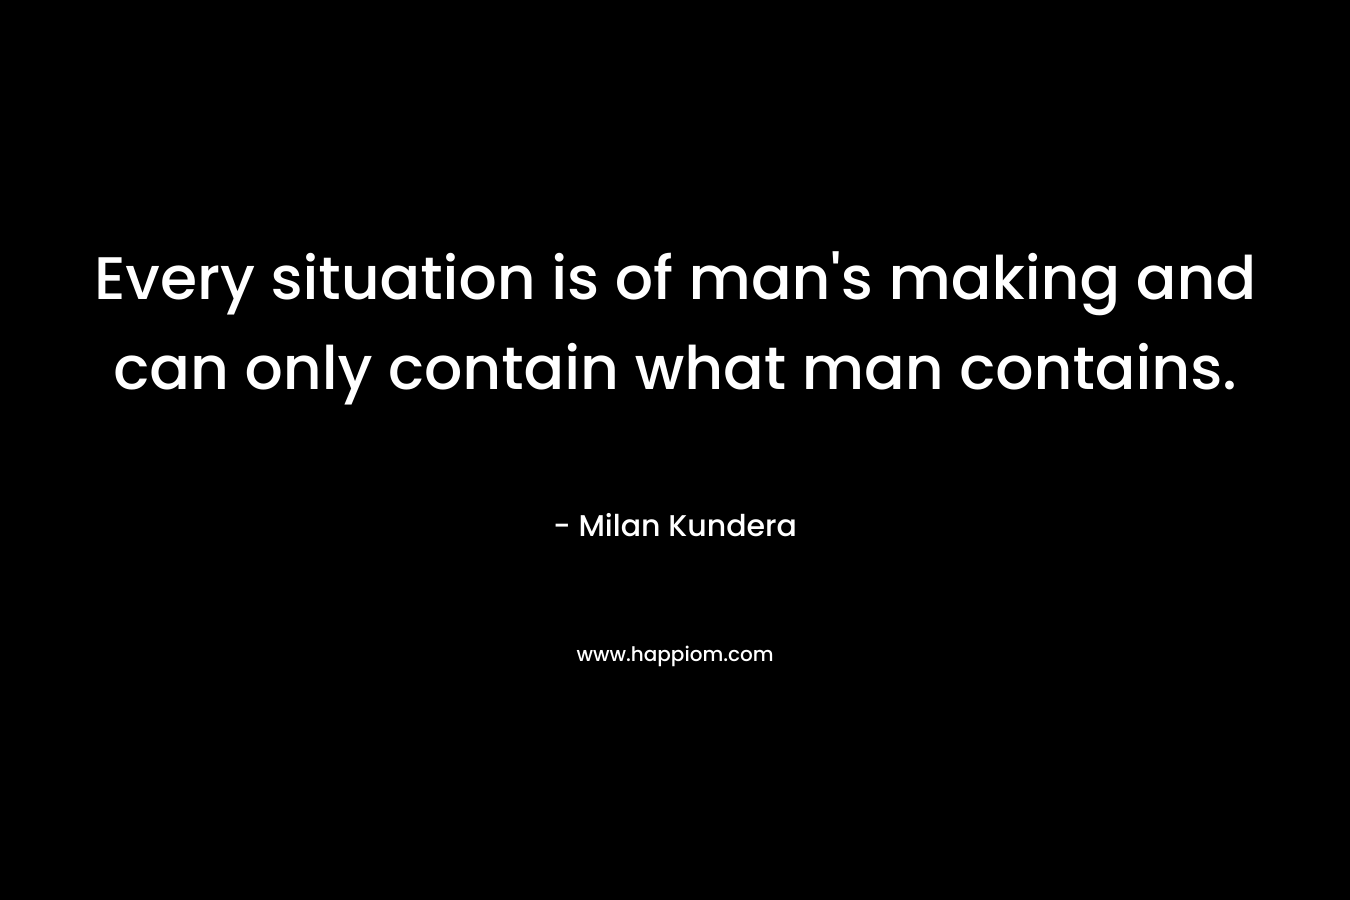 Every situation is of man's making and can only contain what man contains.